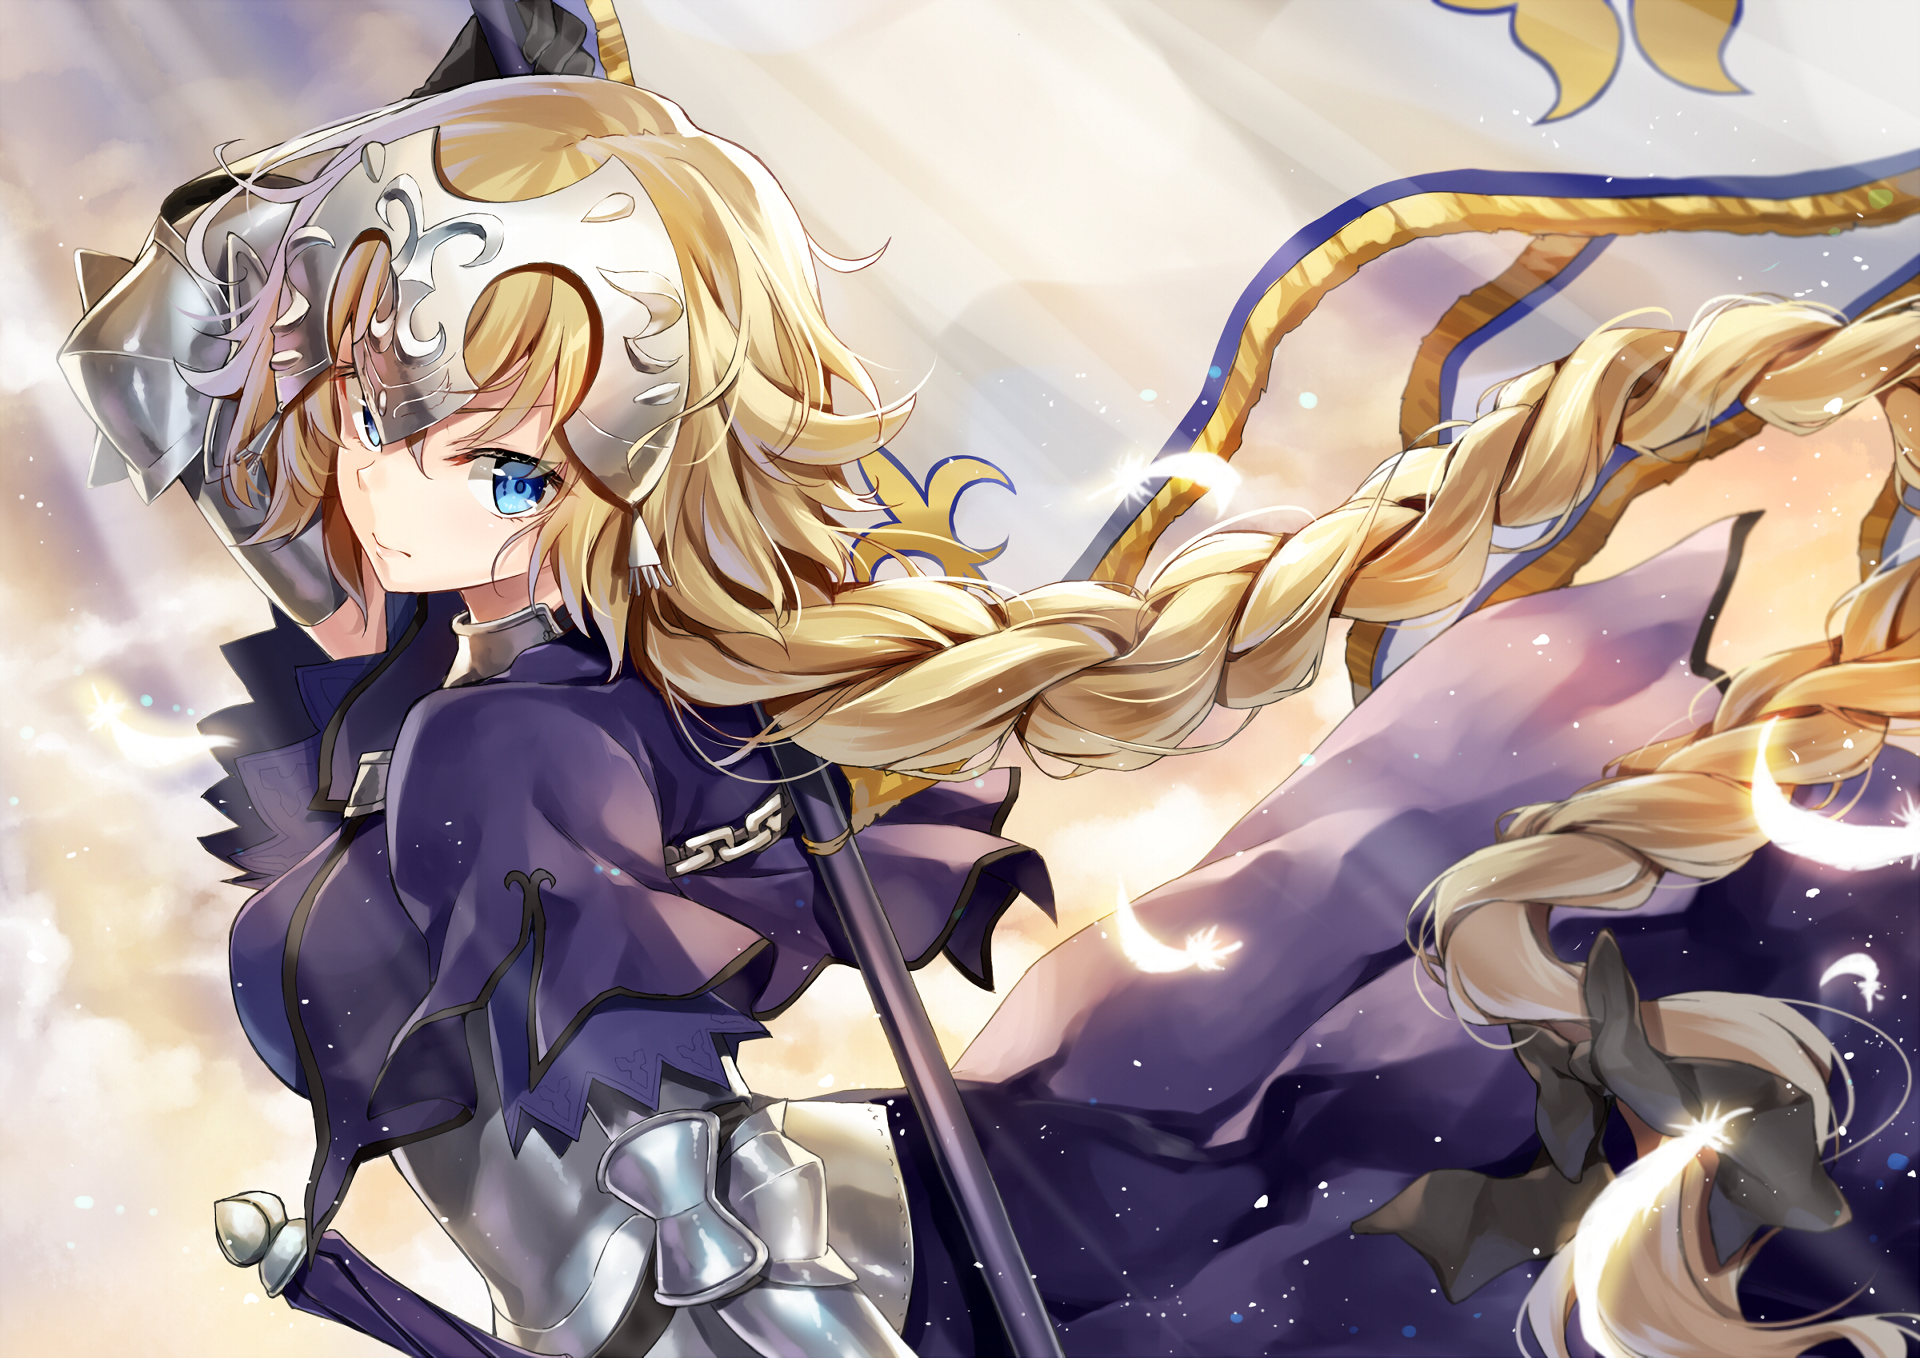 584 Fate Apocrypha Hd Wallpapers Background Images Wallpaper Abyss